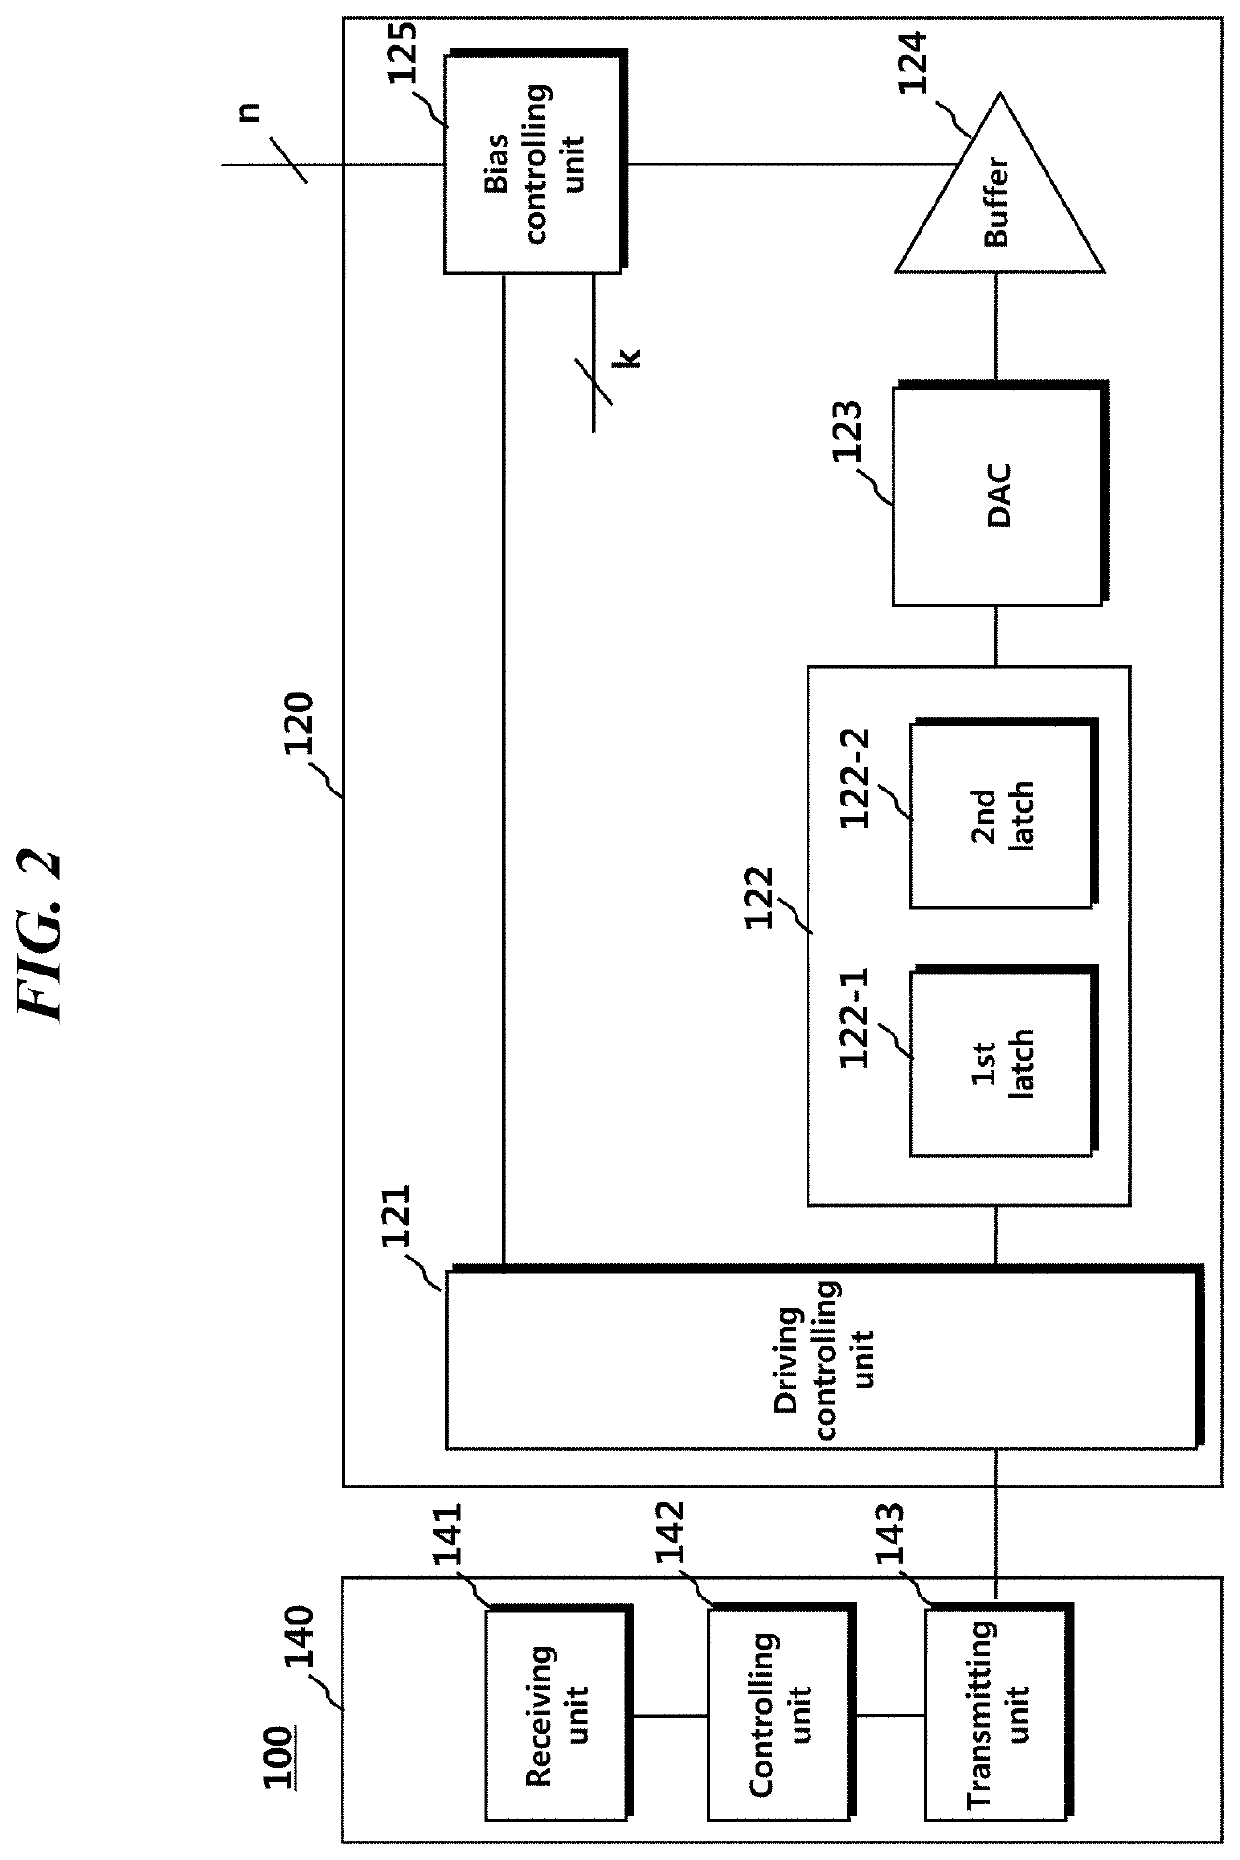 Display device, timing controller and source driver